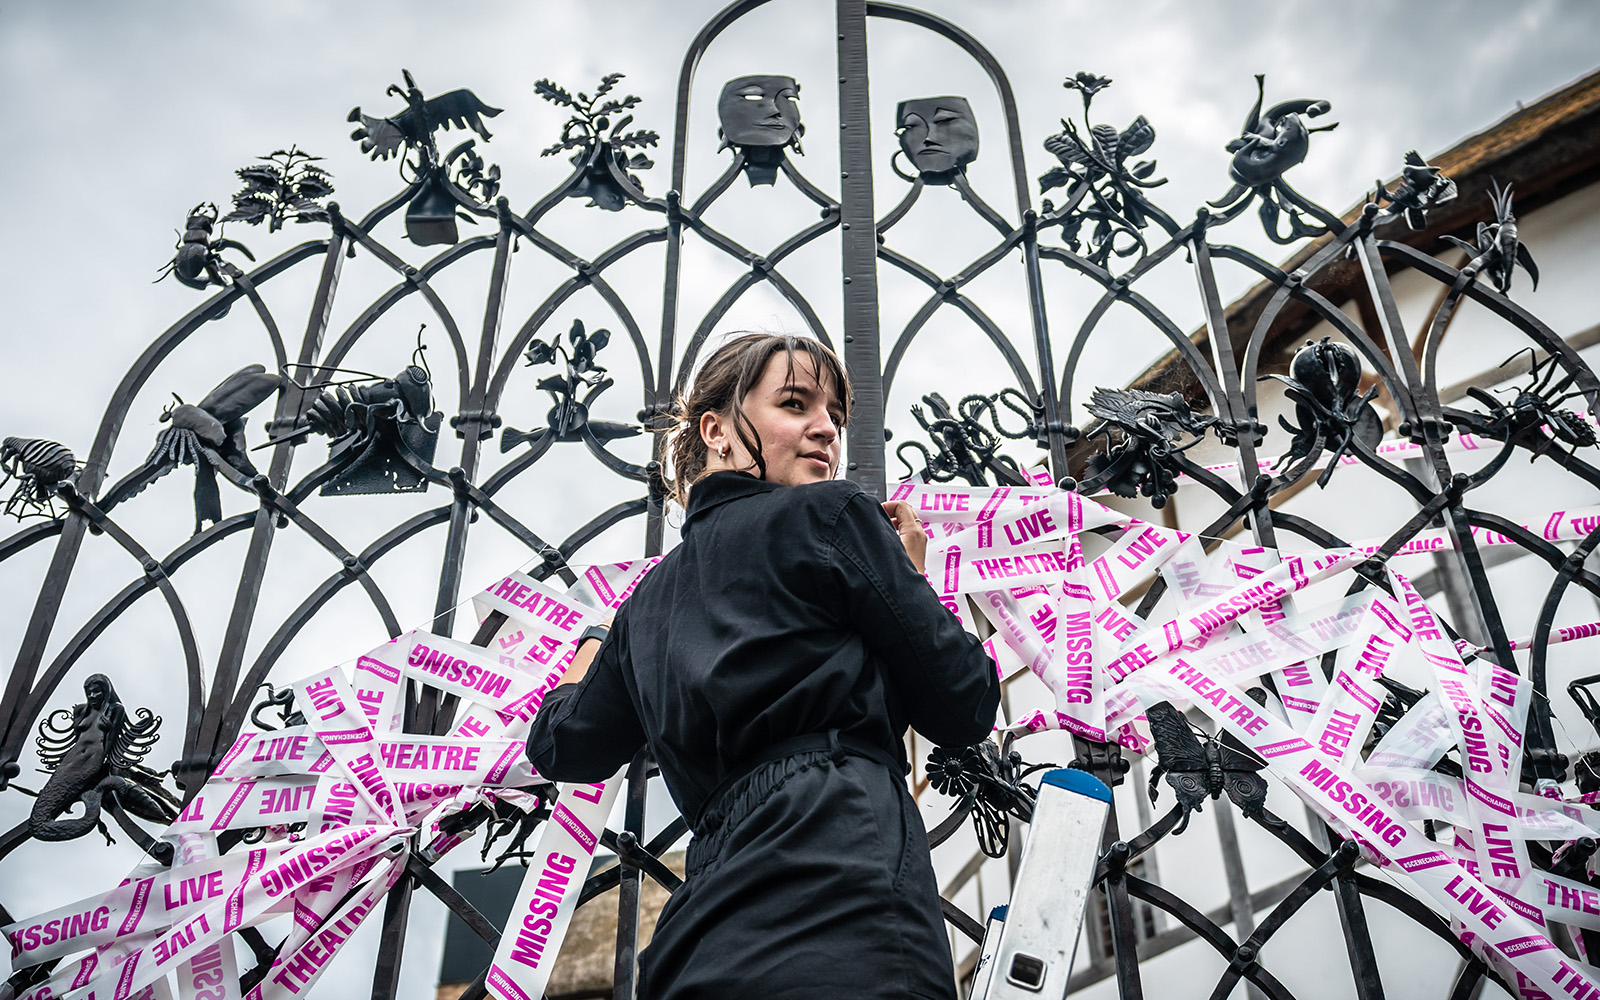 A shot looking up at a woman standing before a set of iron gates, placing white and pink tape.